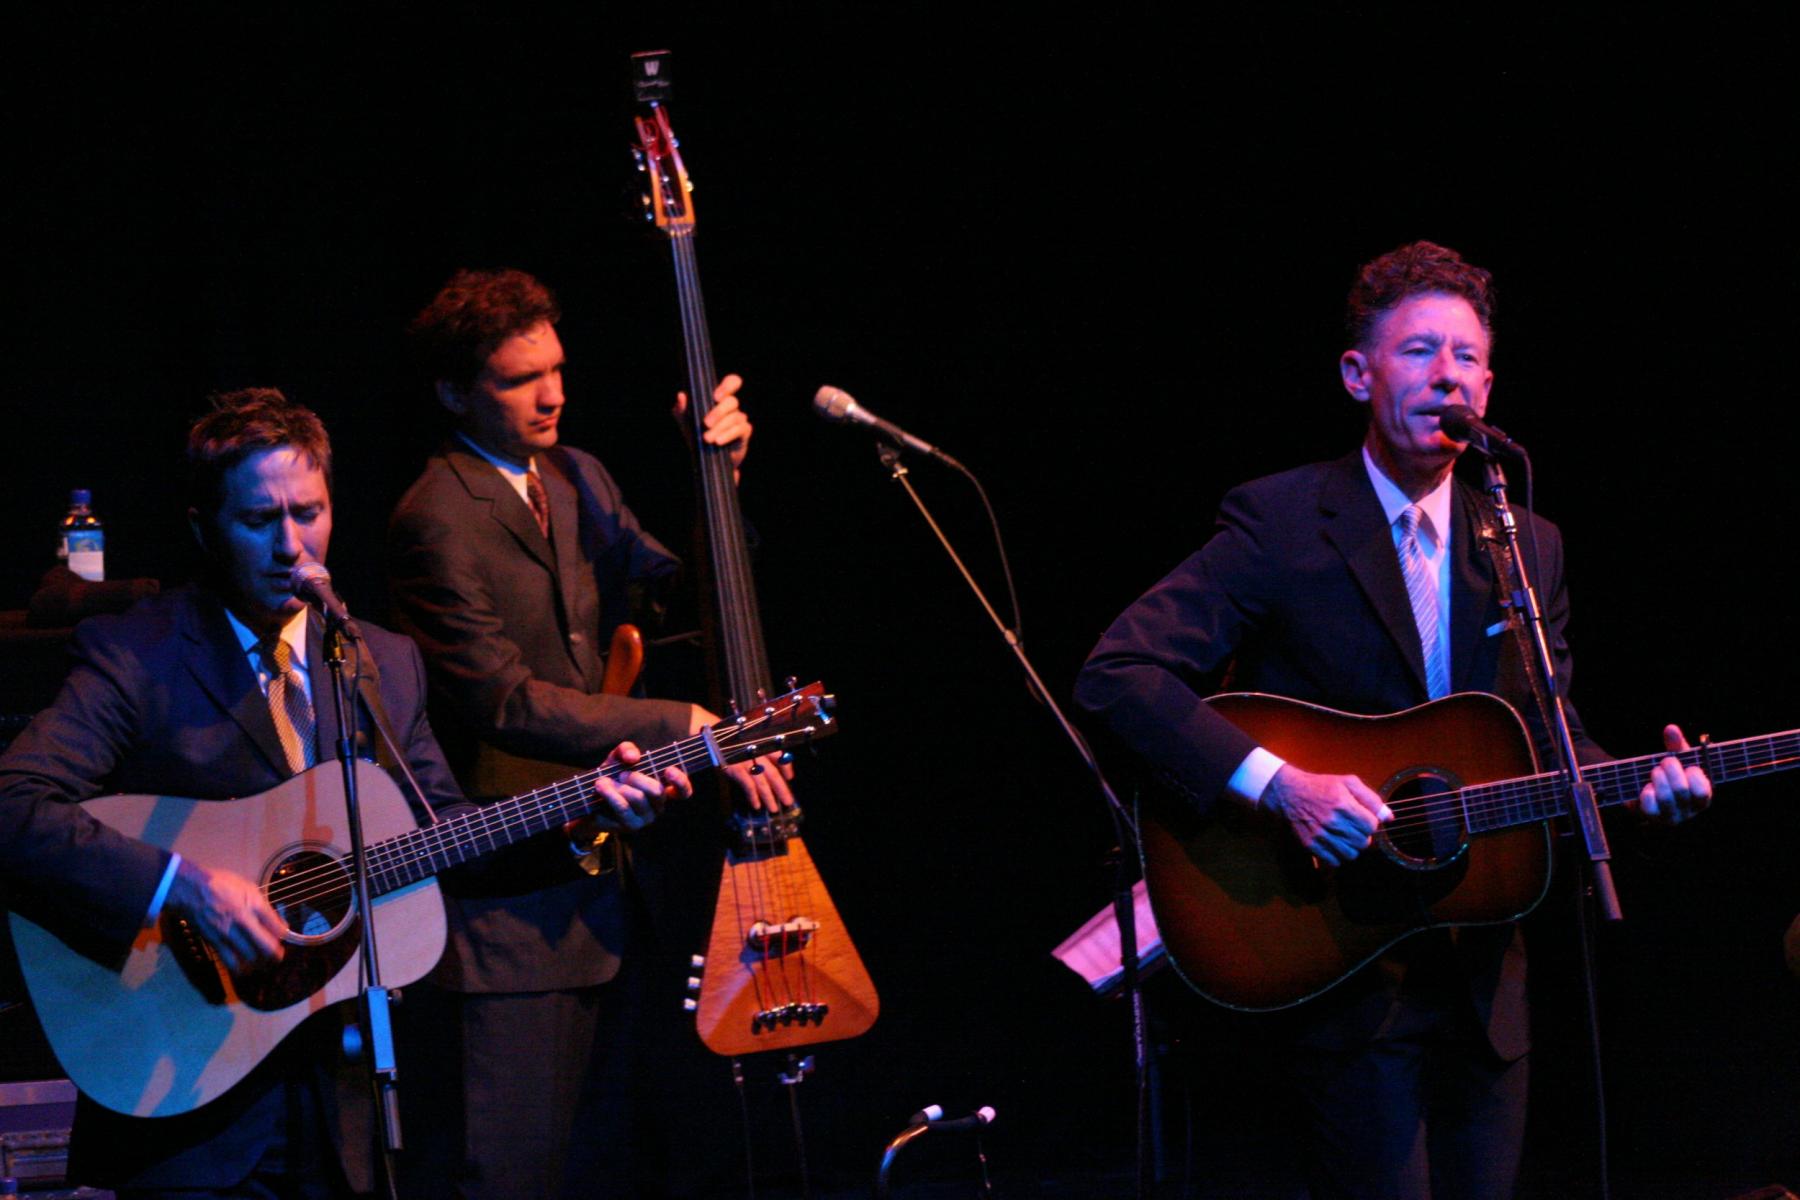 Lyle Lovett, May 30, 2009. Photo by Fred Covarrubias.